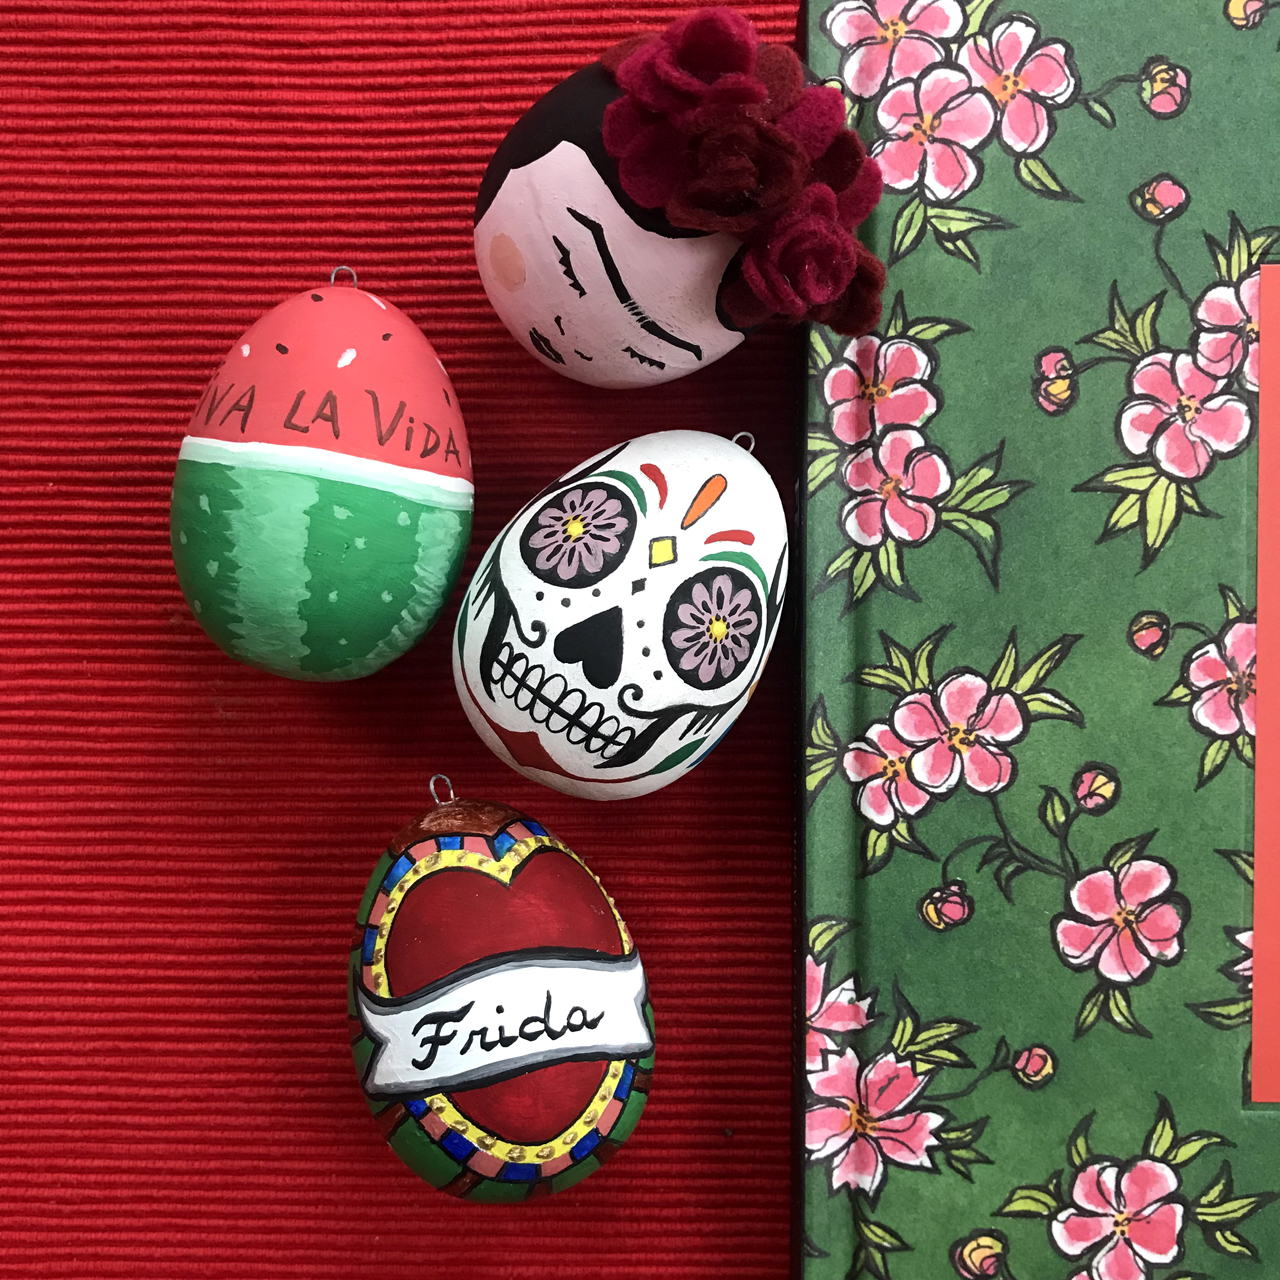 Frida Kahlo and Mexican heritage inspired Easter Eggs